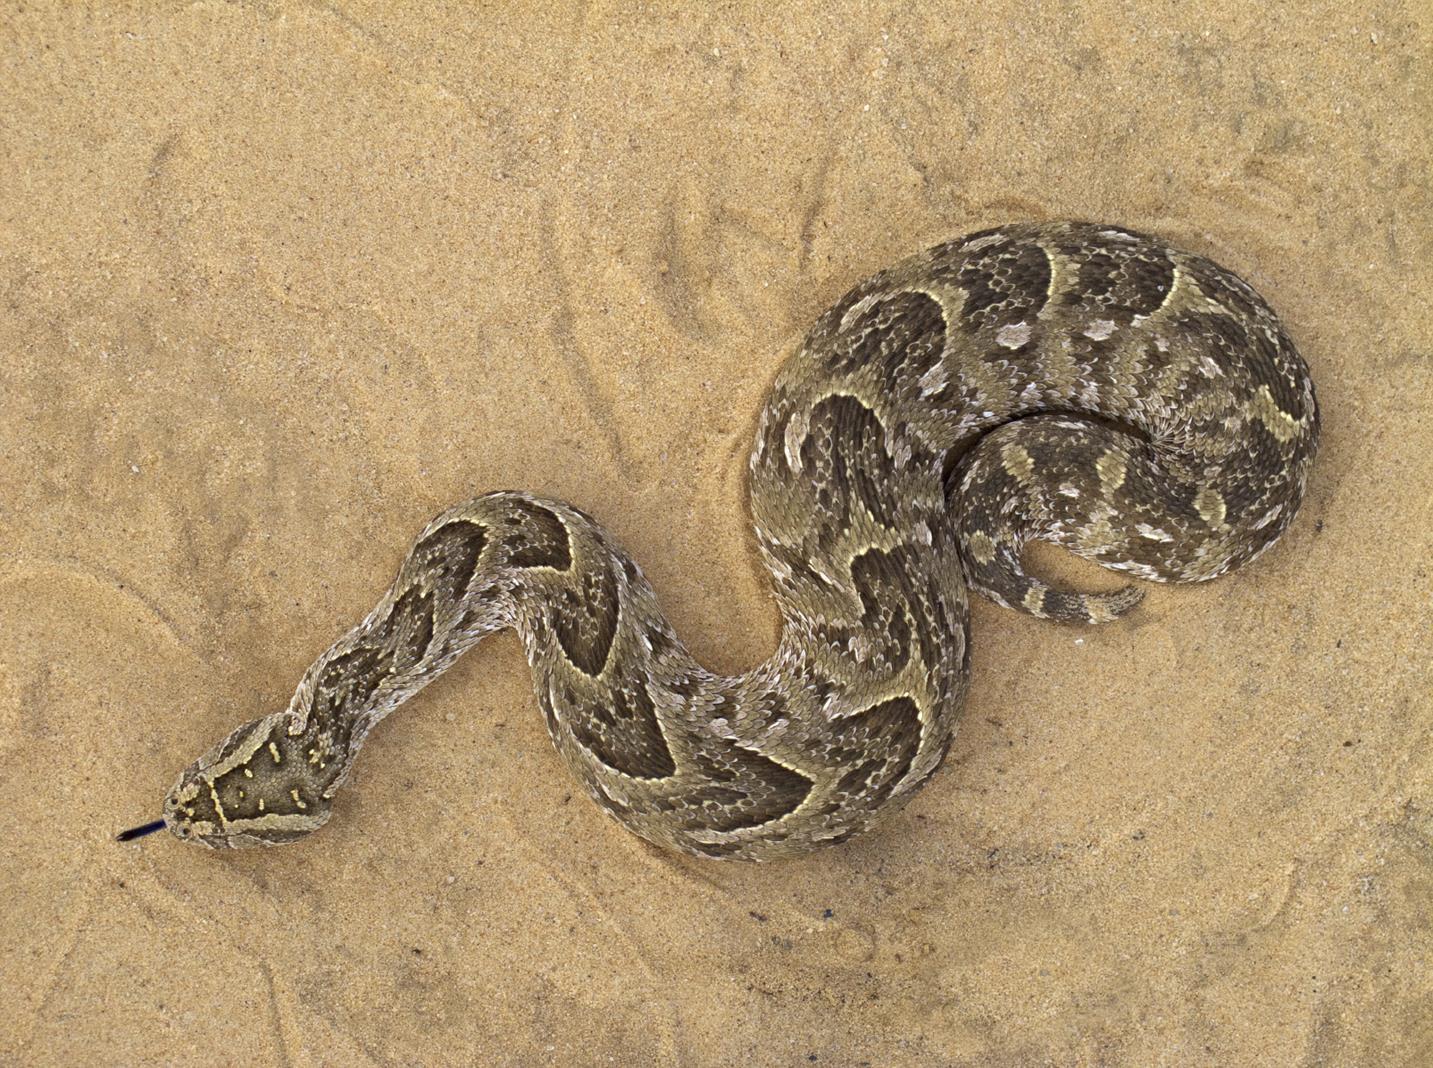 The Puff adder is widely spread throughout South Africa, Namibia, Botswana, Zambia, Zimbabwe, Malawi and Mozambique. 